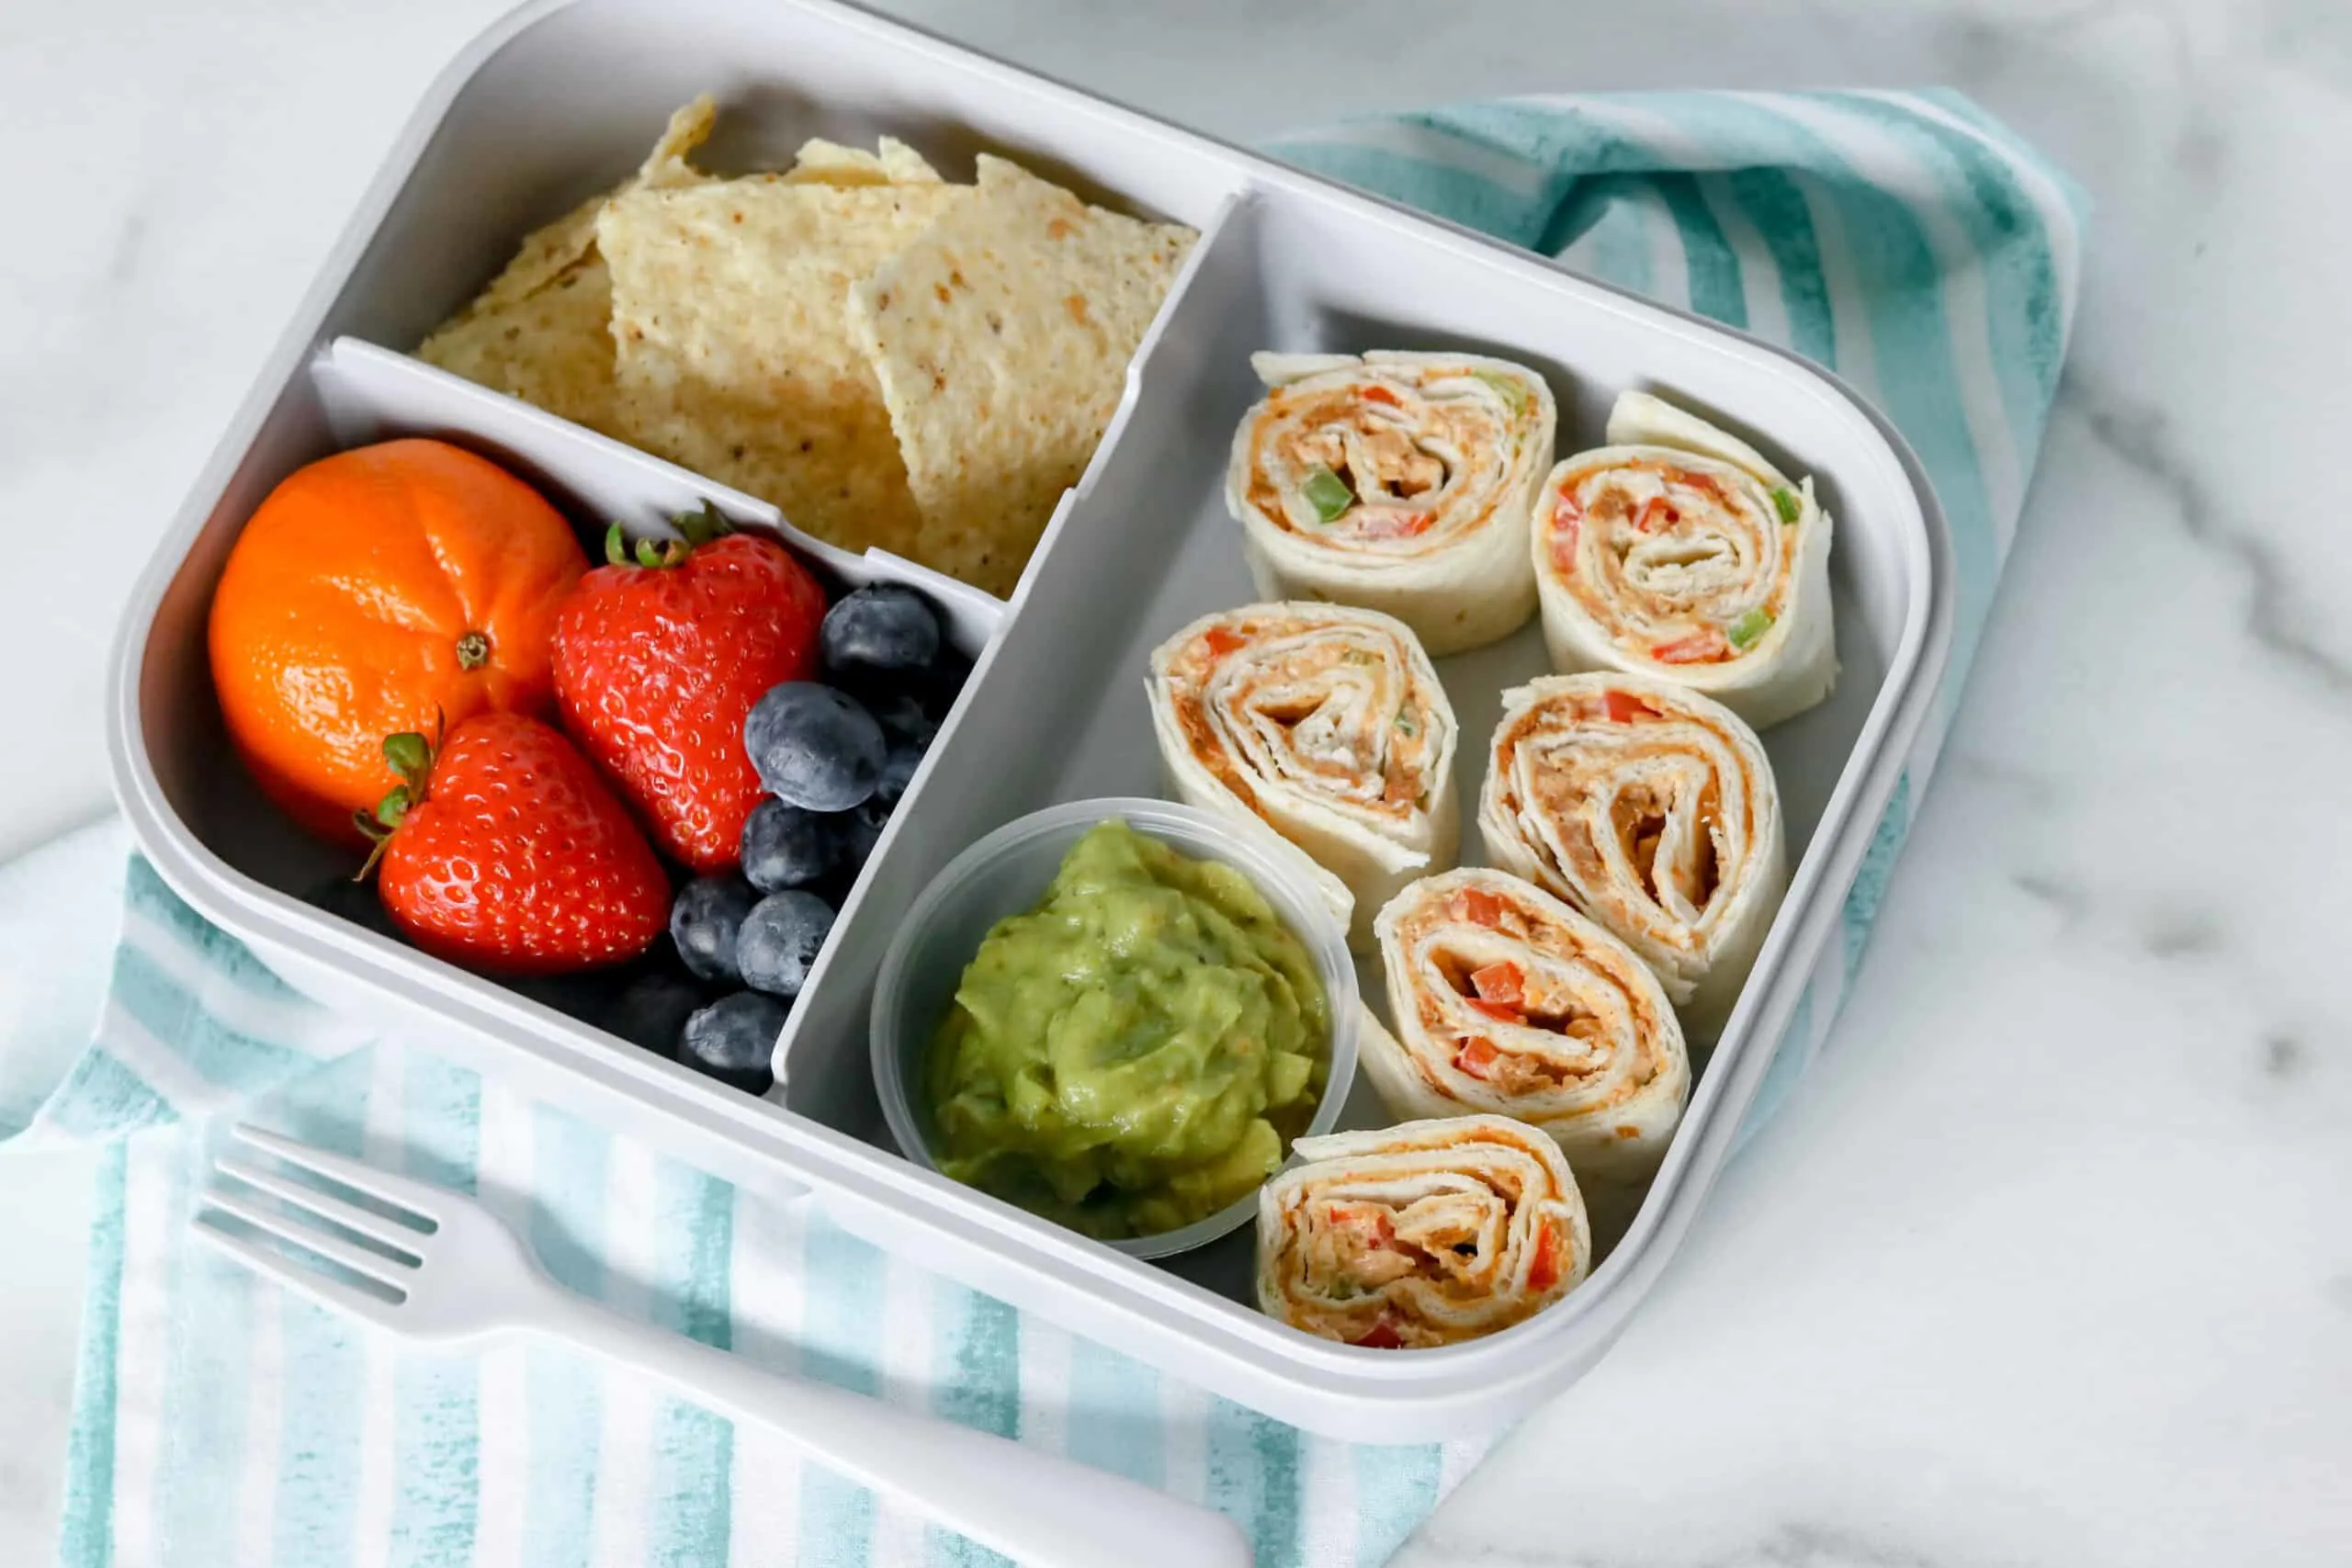 A bento box full with taco pinwheels, blueberries, strawberries, a small orange and some chips.